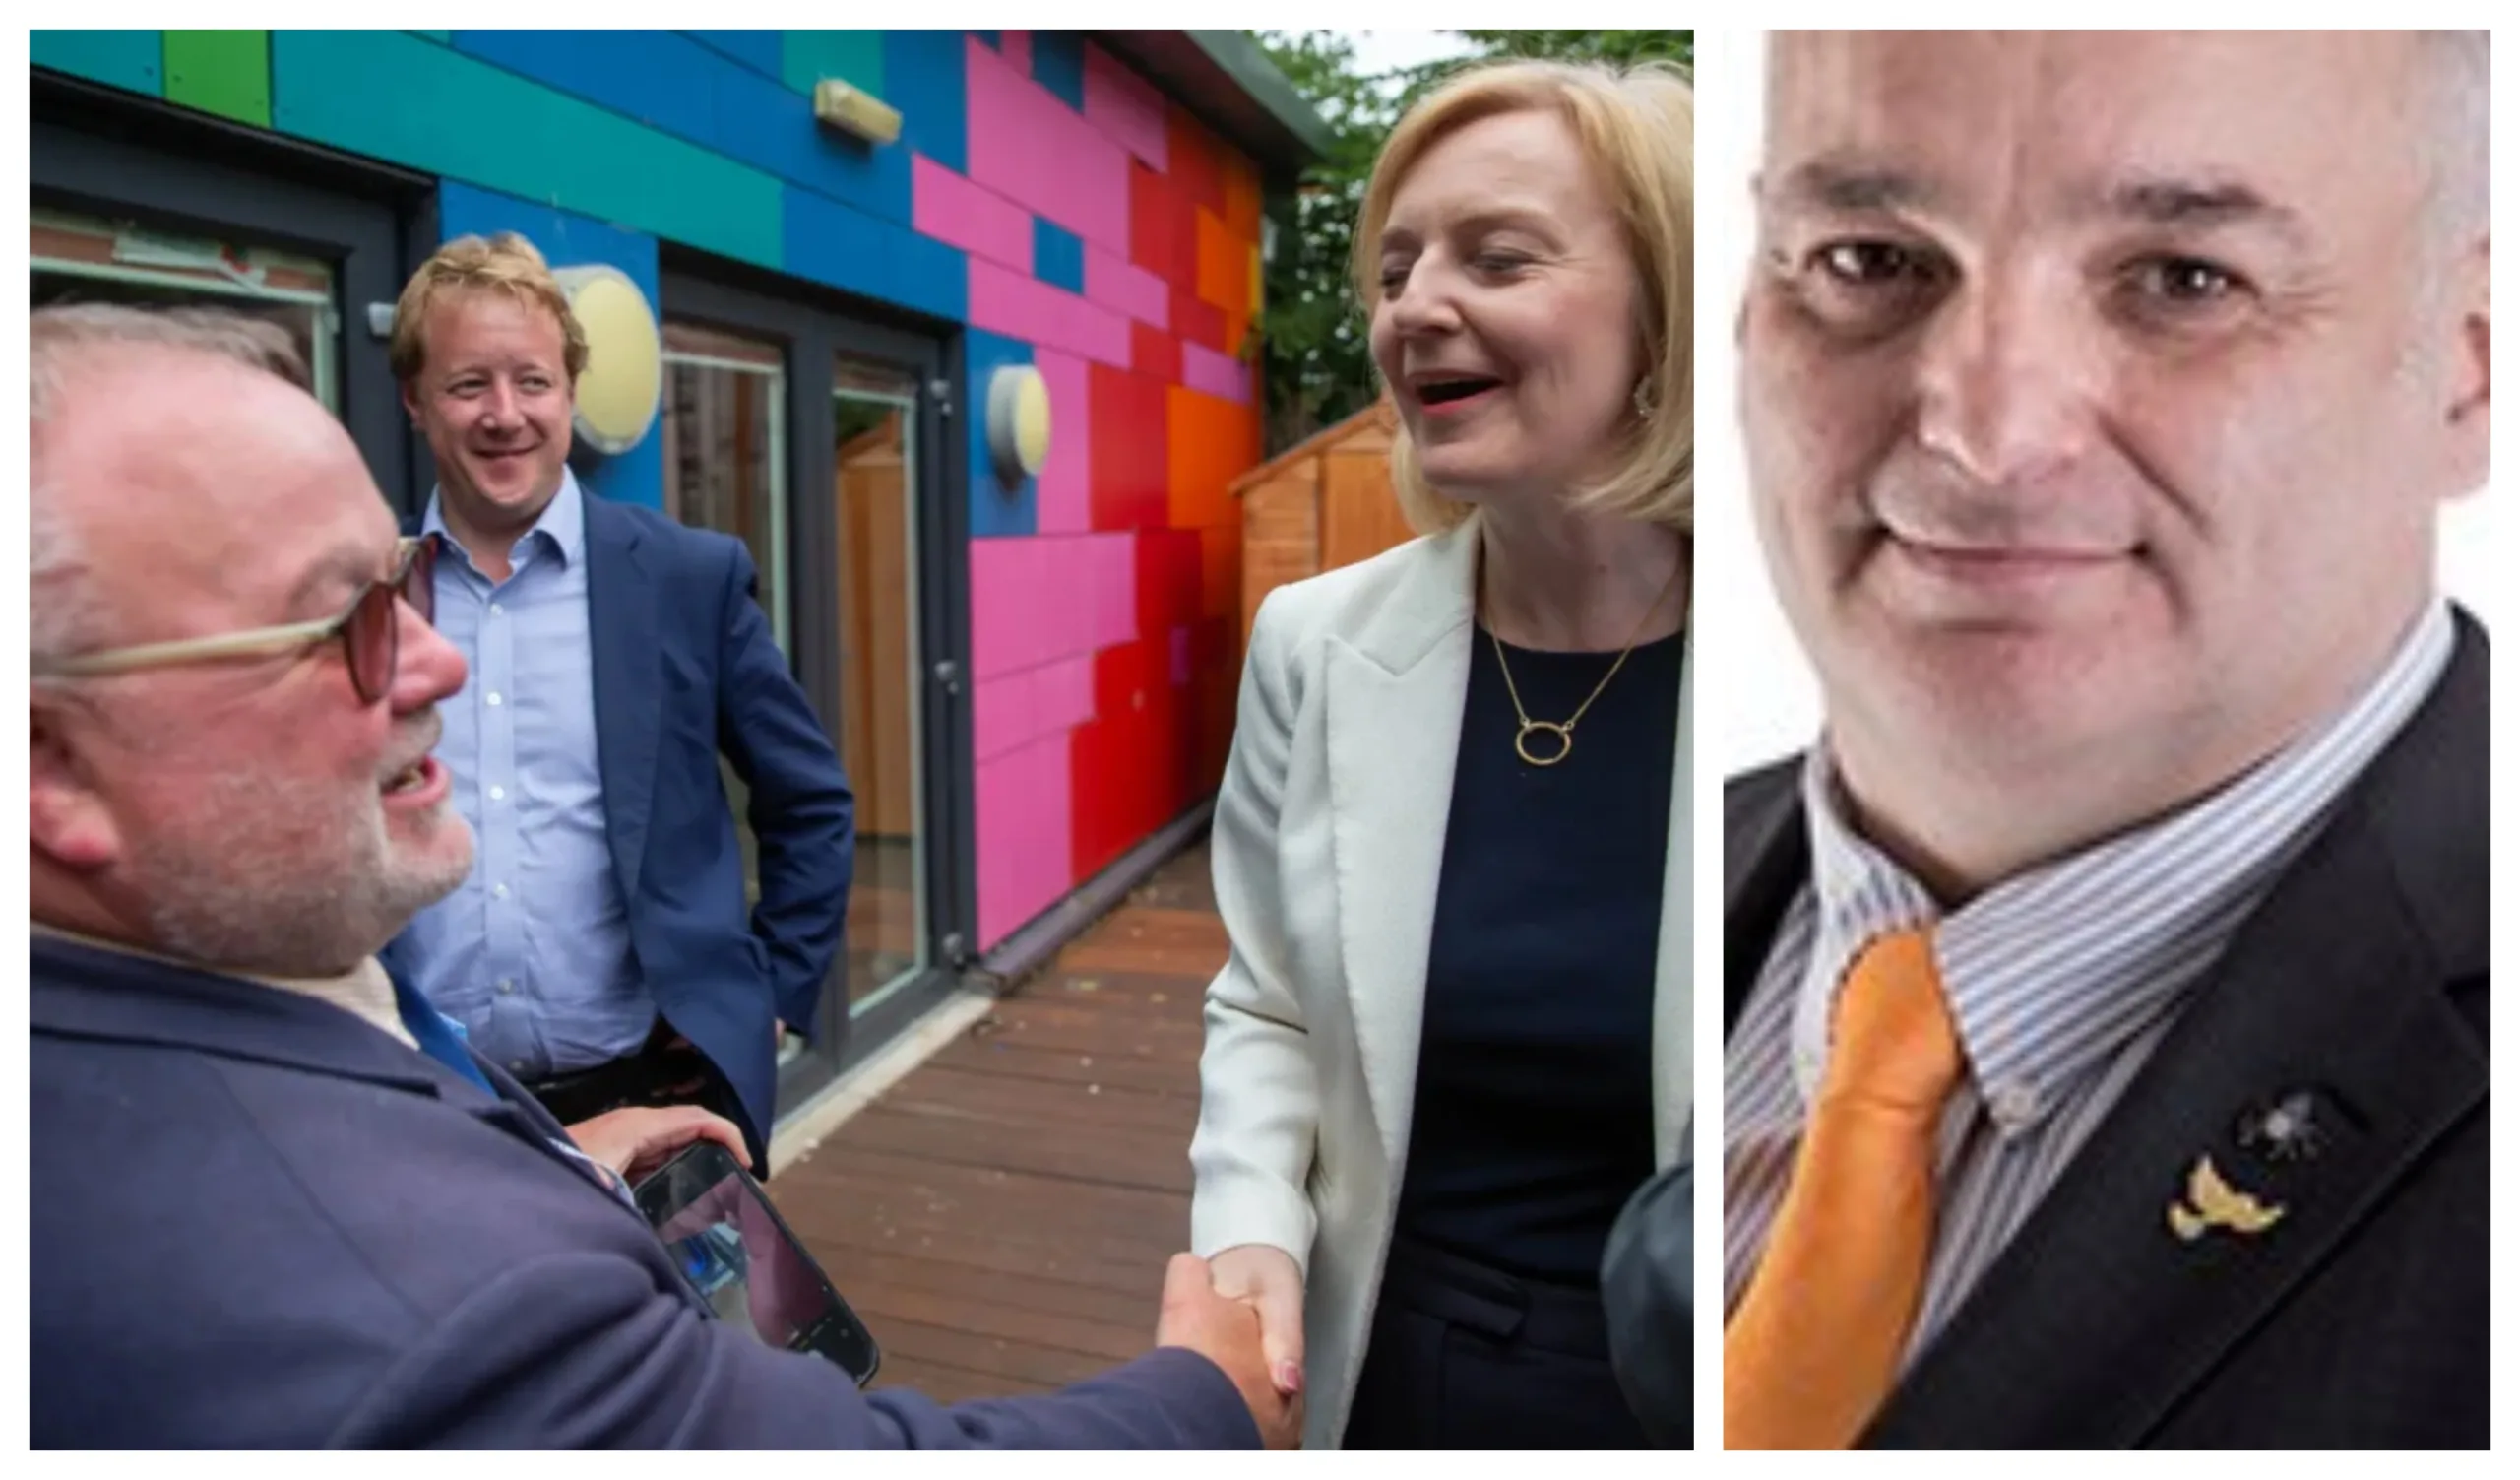 Left: Cllr Wayne Fitzgerald welcoming Liz Truss to the city with Peterborough MP Paul Bristow and right: Cllr Christian Hogg, Lib Dem leader and outspoken critic of Cllr Fitzgerald